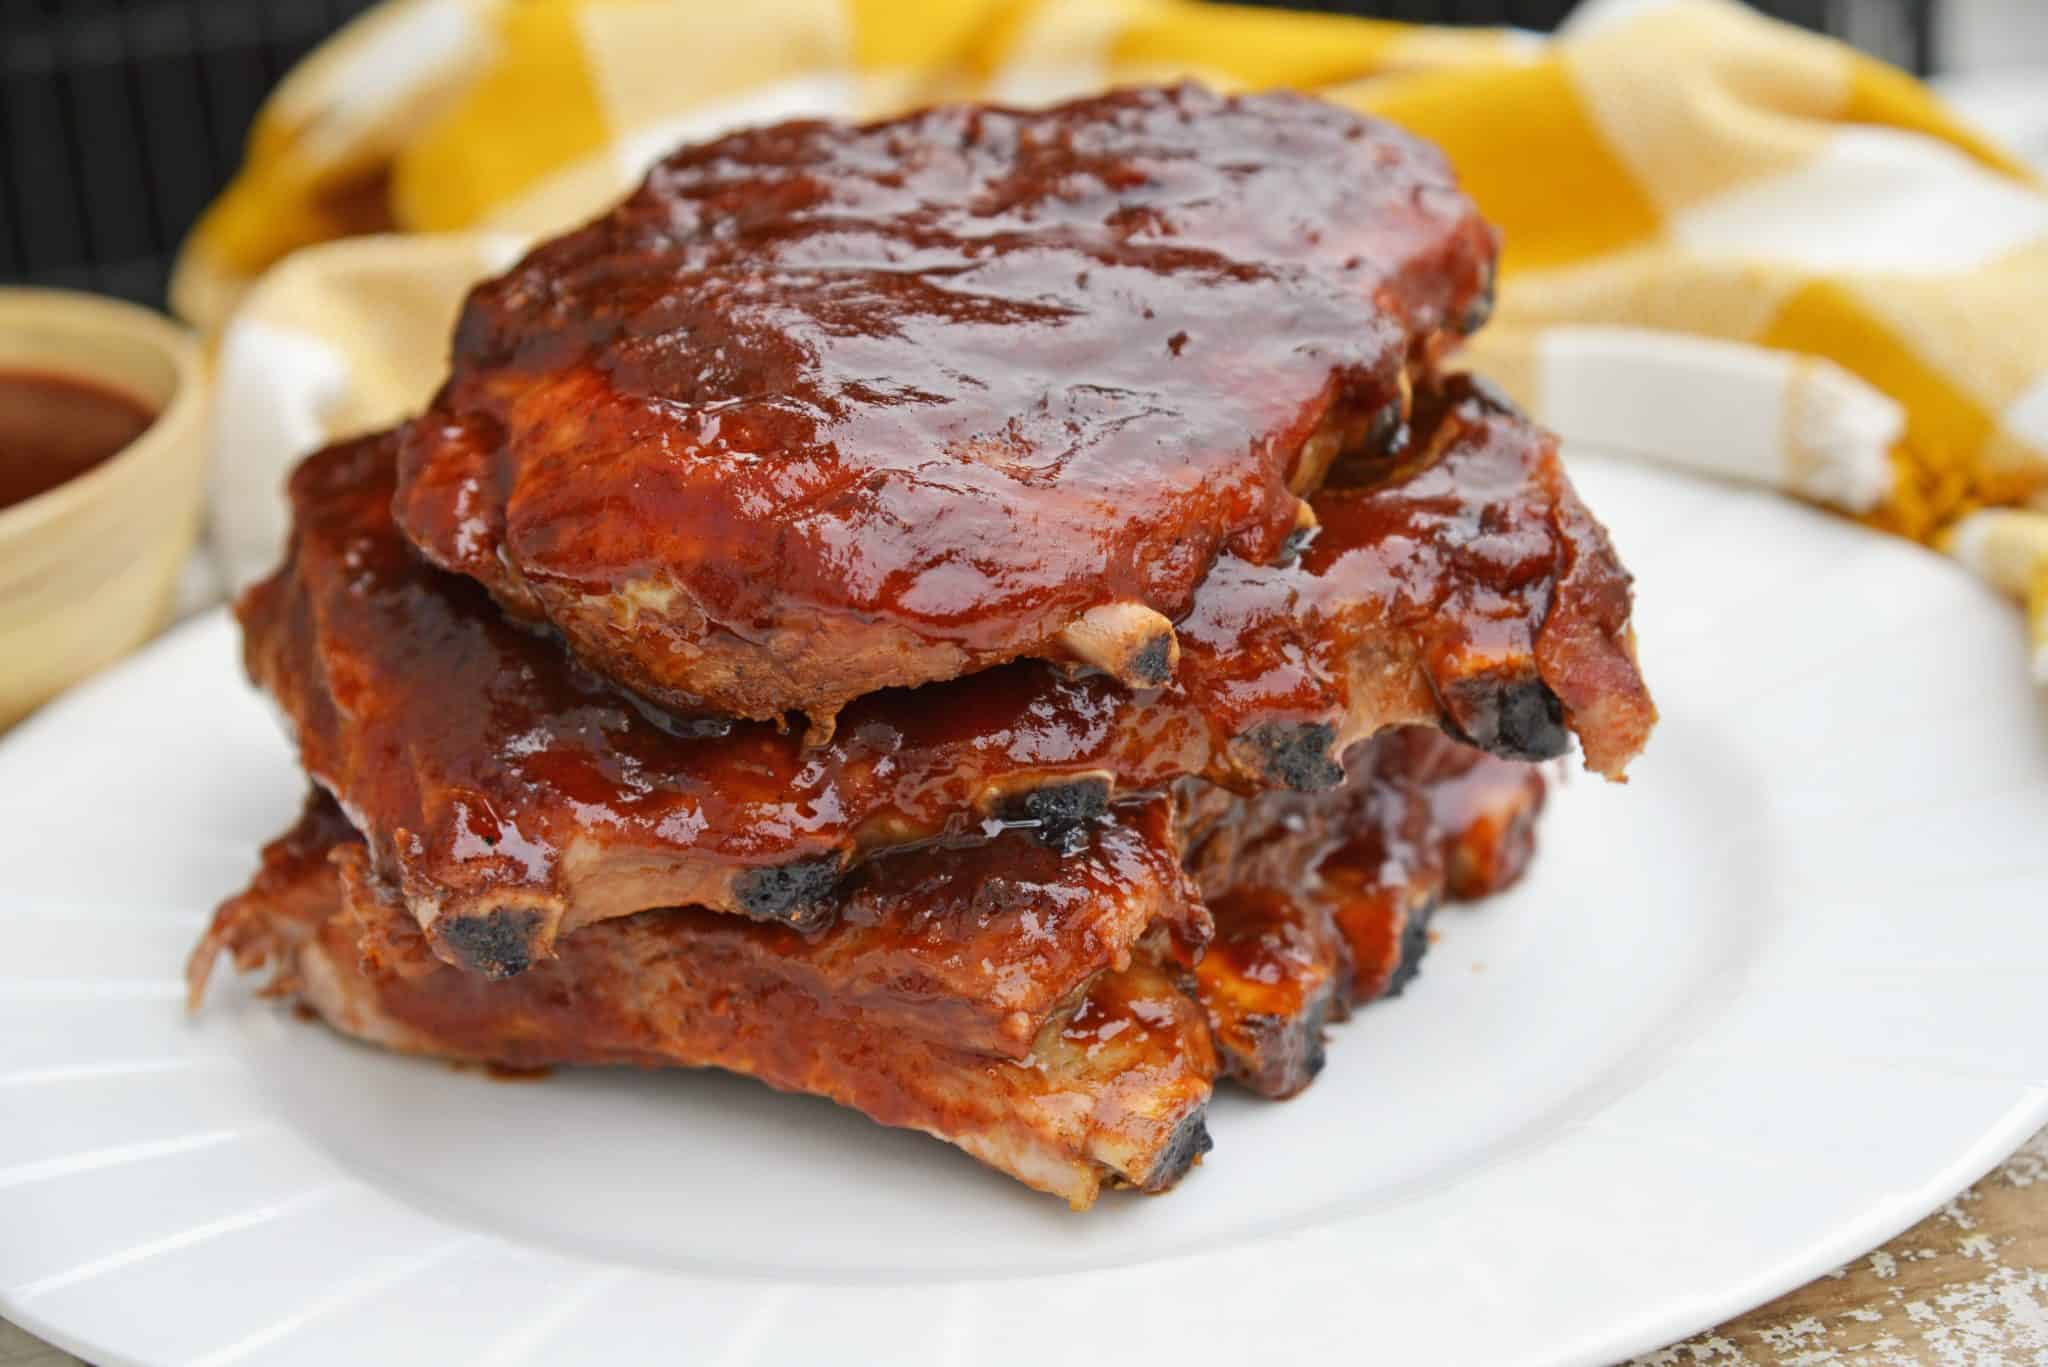 This is the Best BBQ Ribs Recipe you'll ever find! This pork ribs recipe falls right off the bone and is smothered in an award winning BBQ sauce! #howtomakeribsonthegrill #BBQribs www.savoryexperiments.com